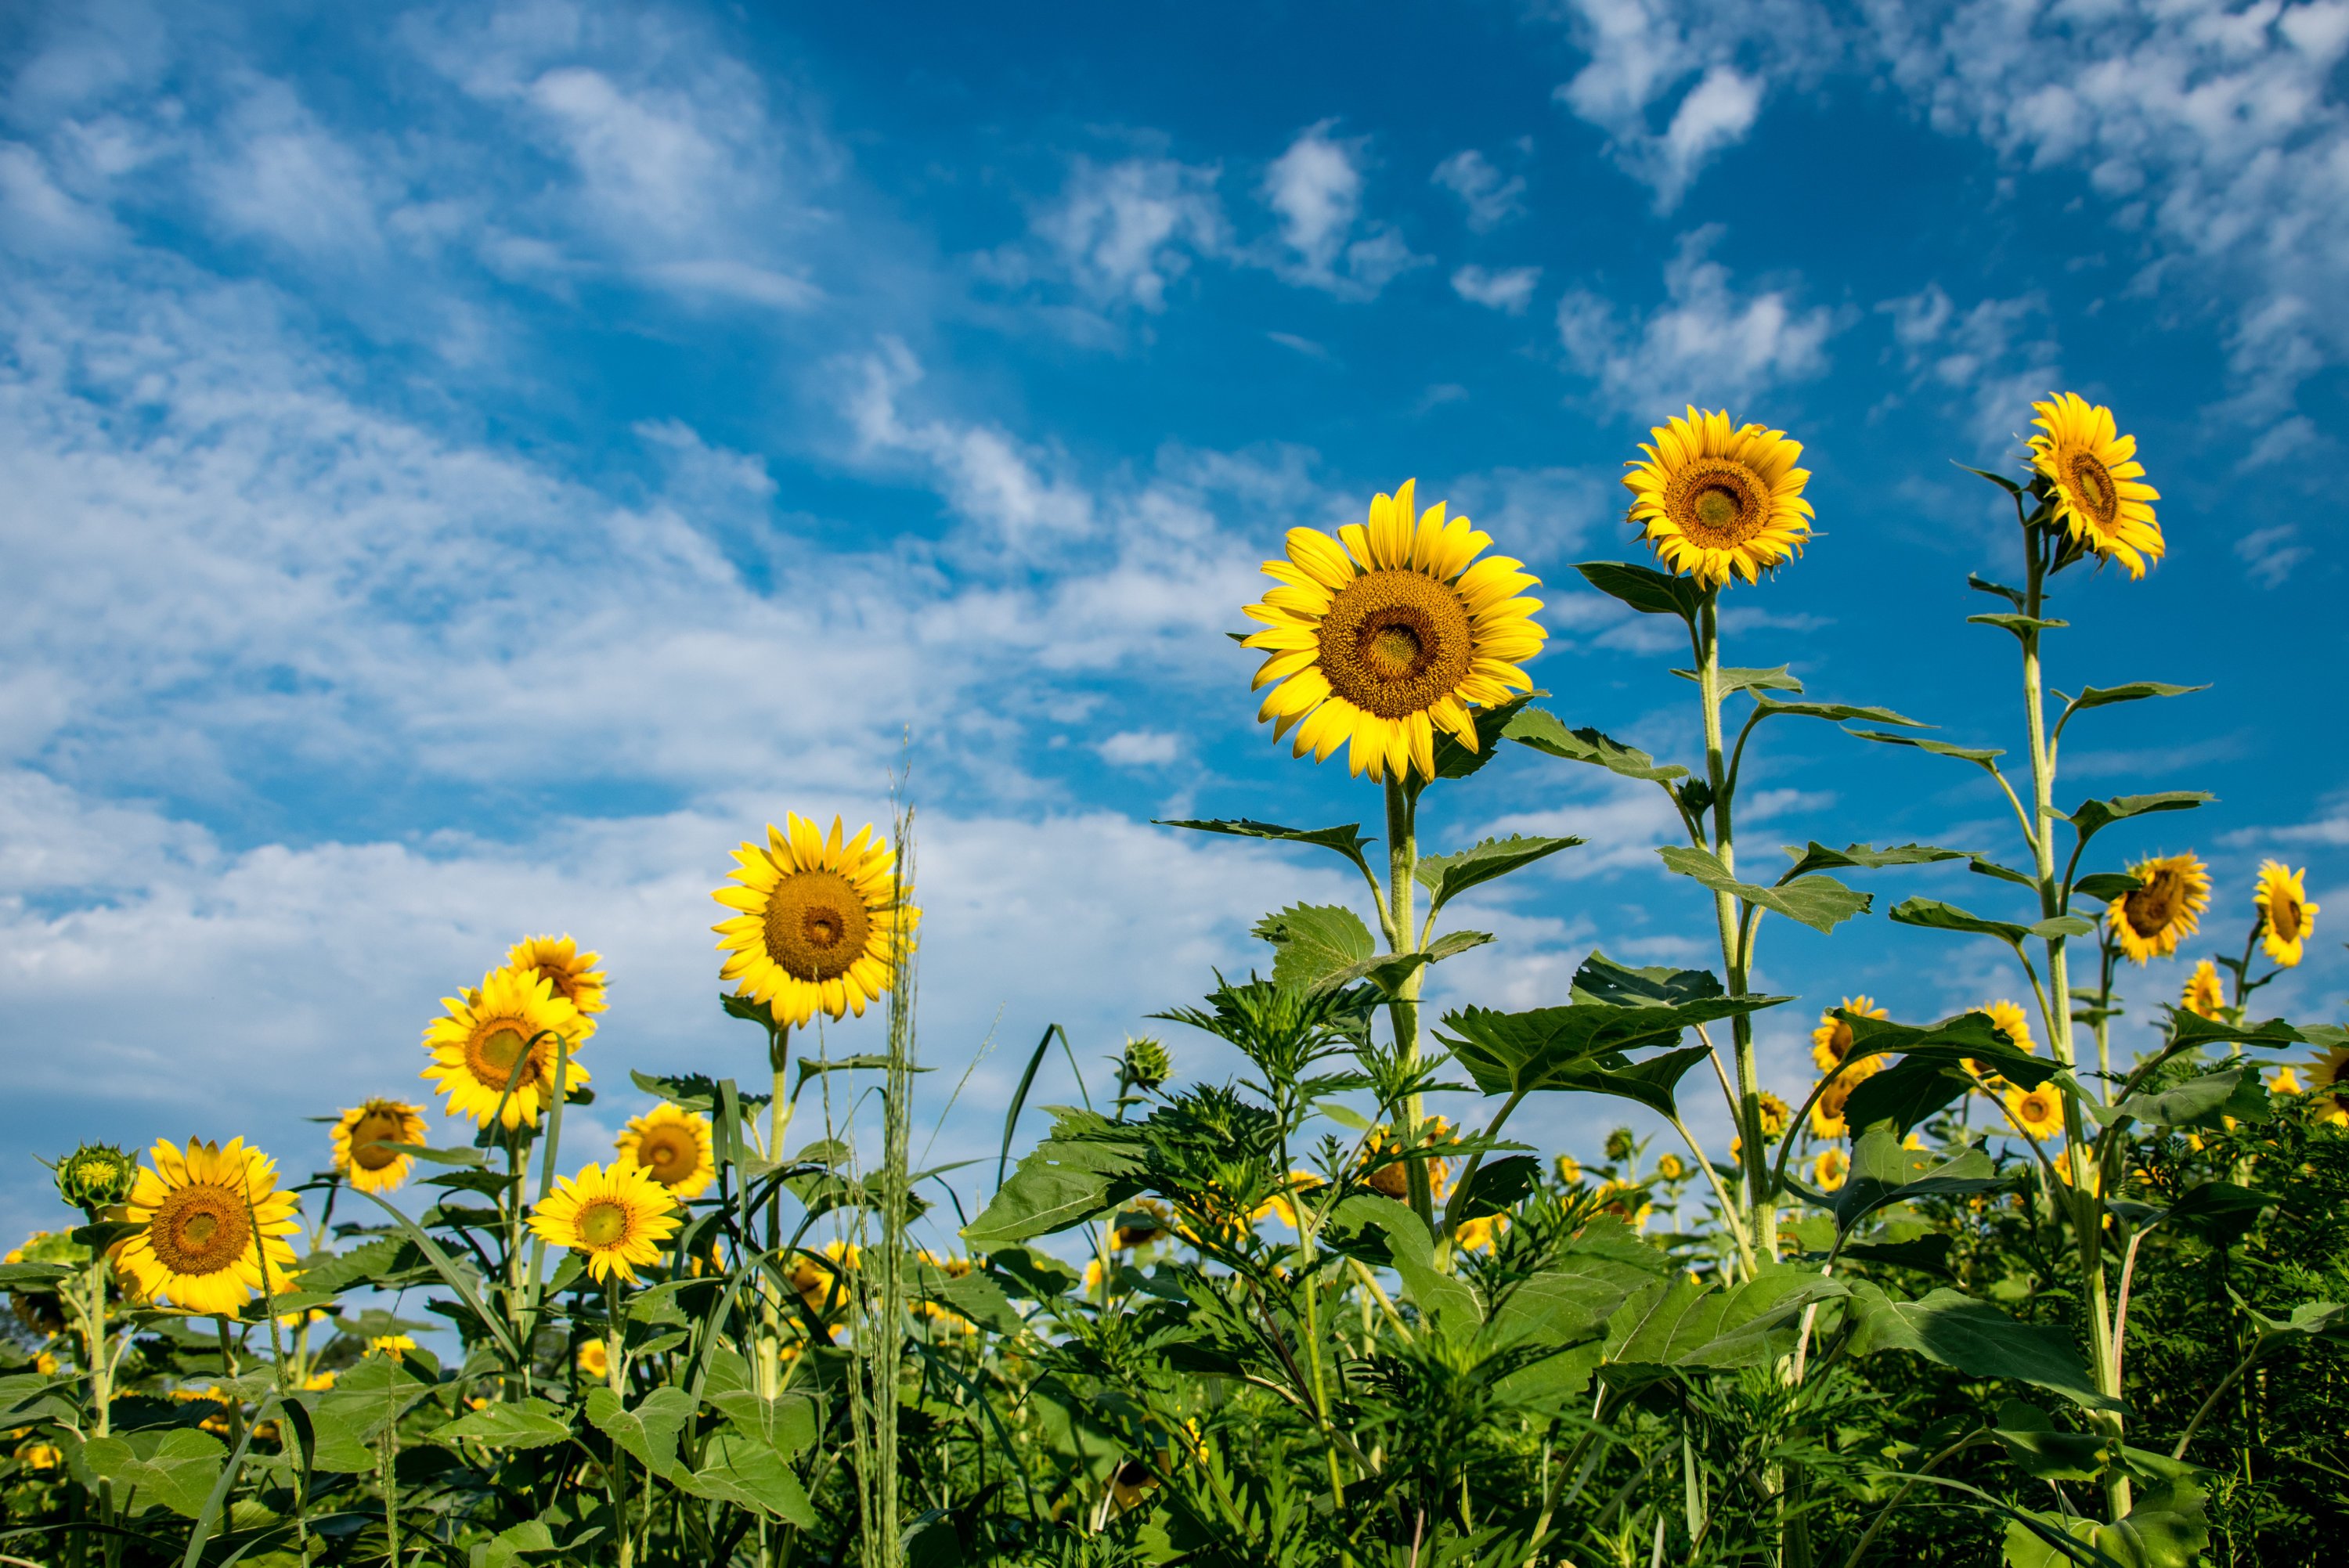 Image of Field of sunflowers in full bloom